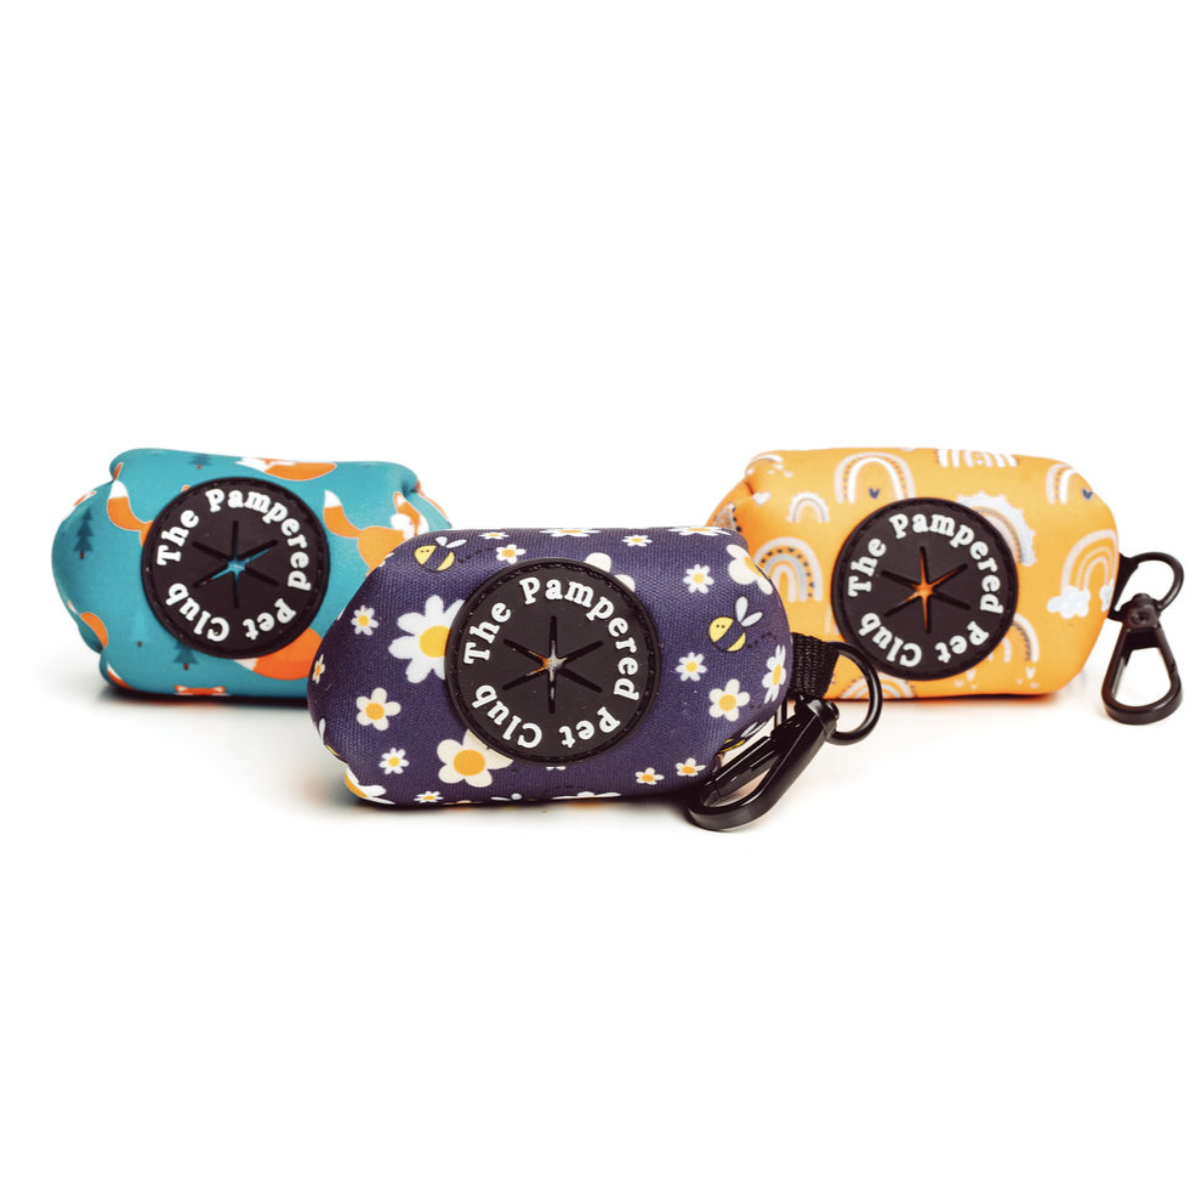 The whole collection of poop bag holders - The Pampered Pet Club